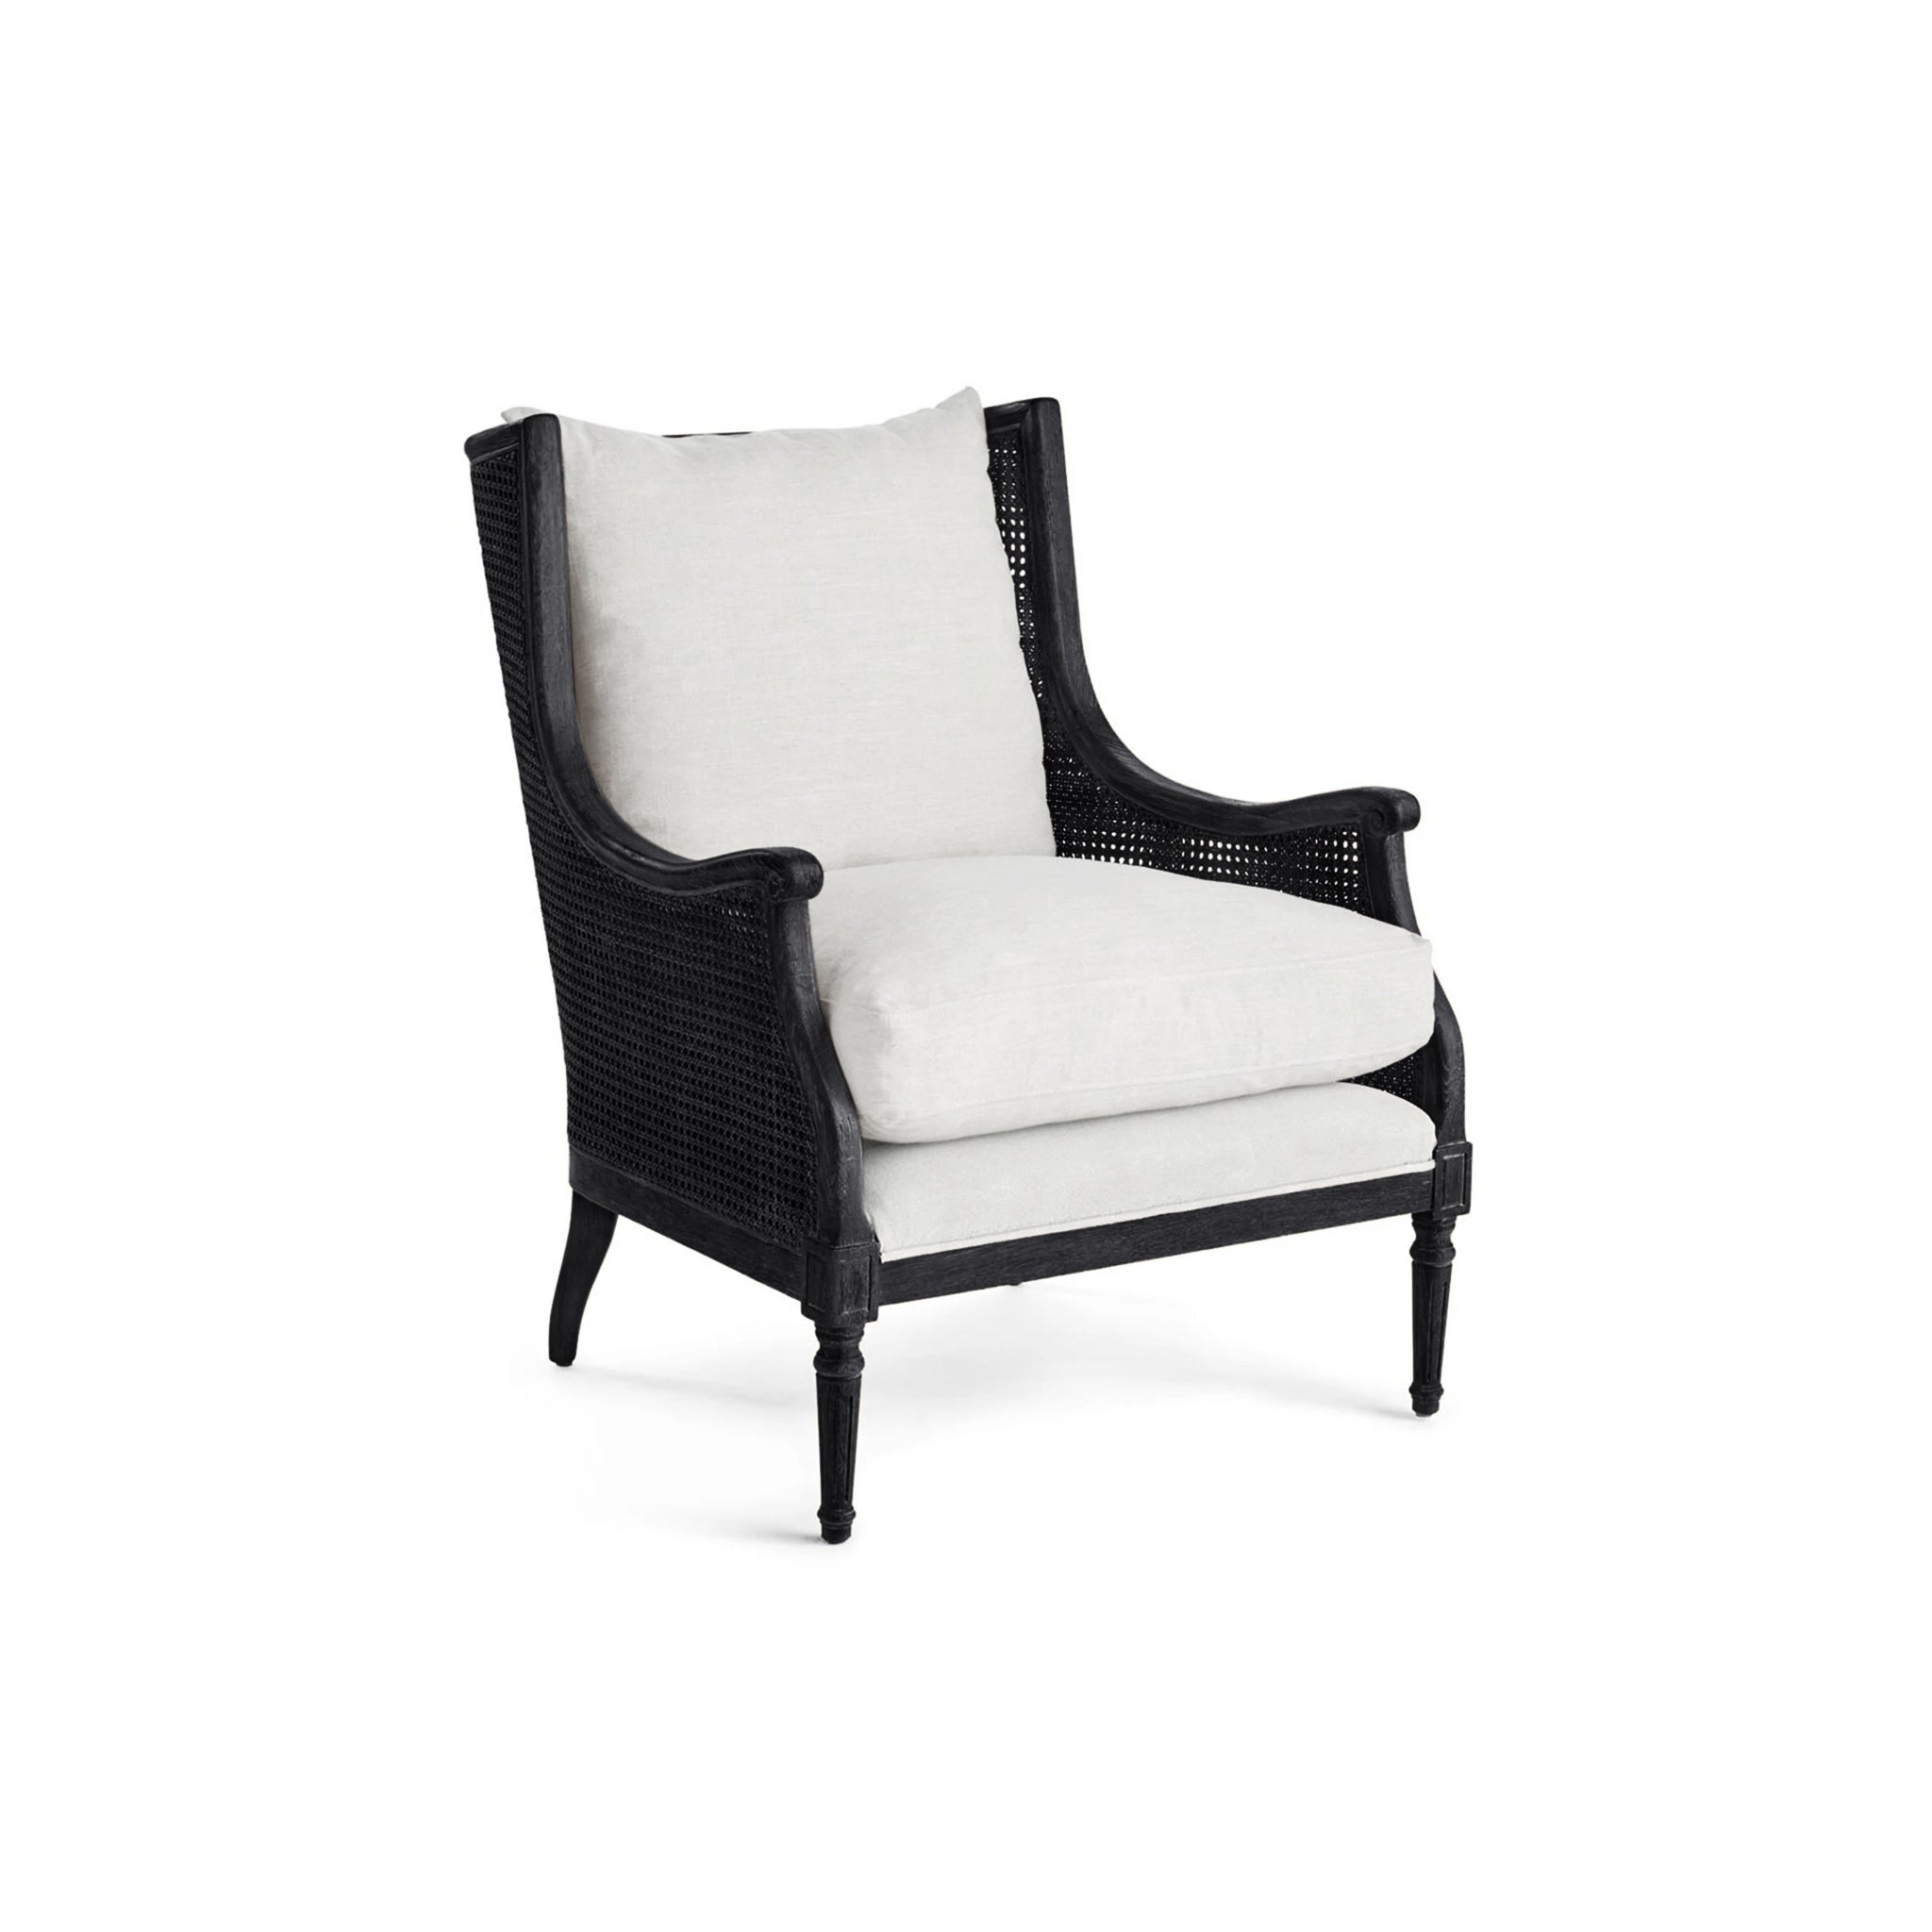 Halle Cane Back Chair